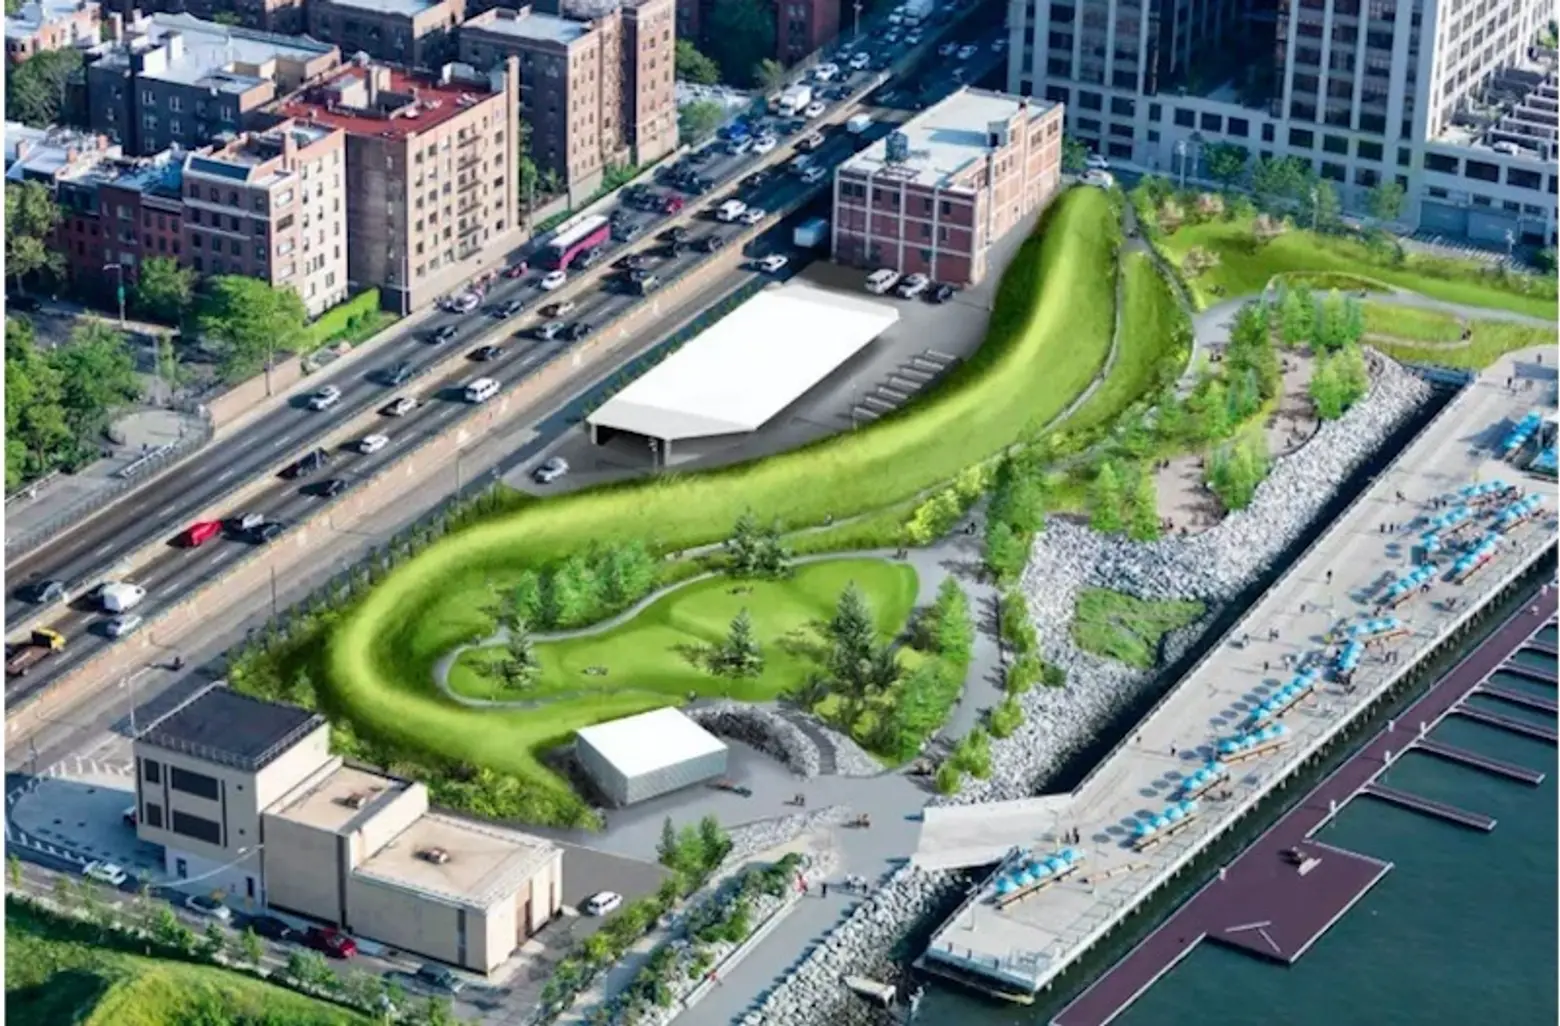 New renderings and photos show Brooklyn Bridge Park’s Pier 5 uplands are almost complete